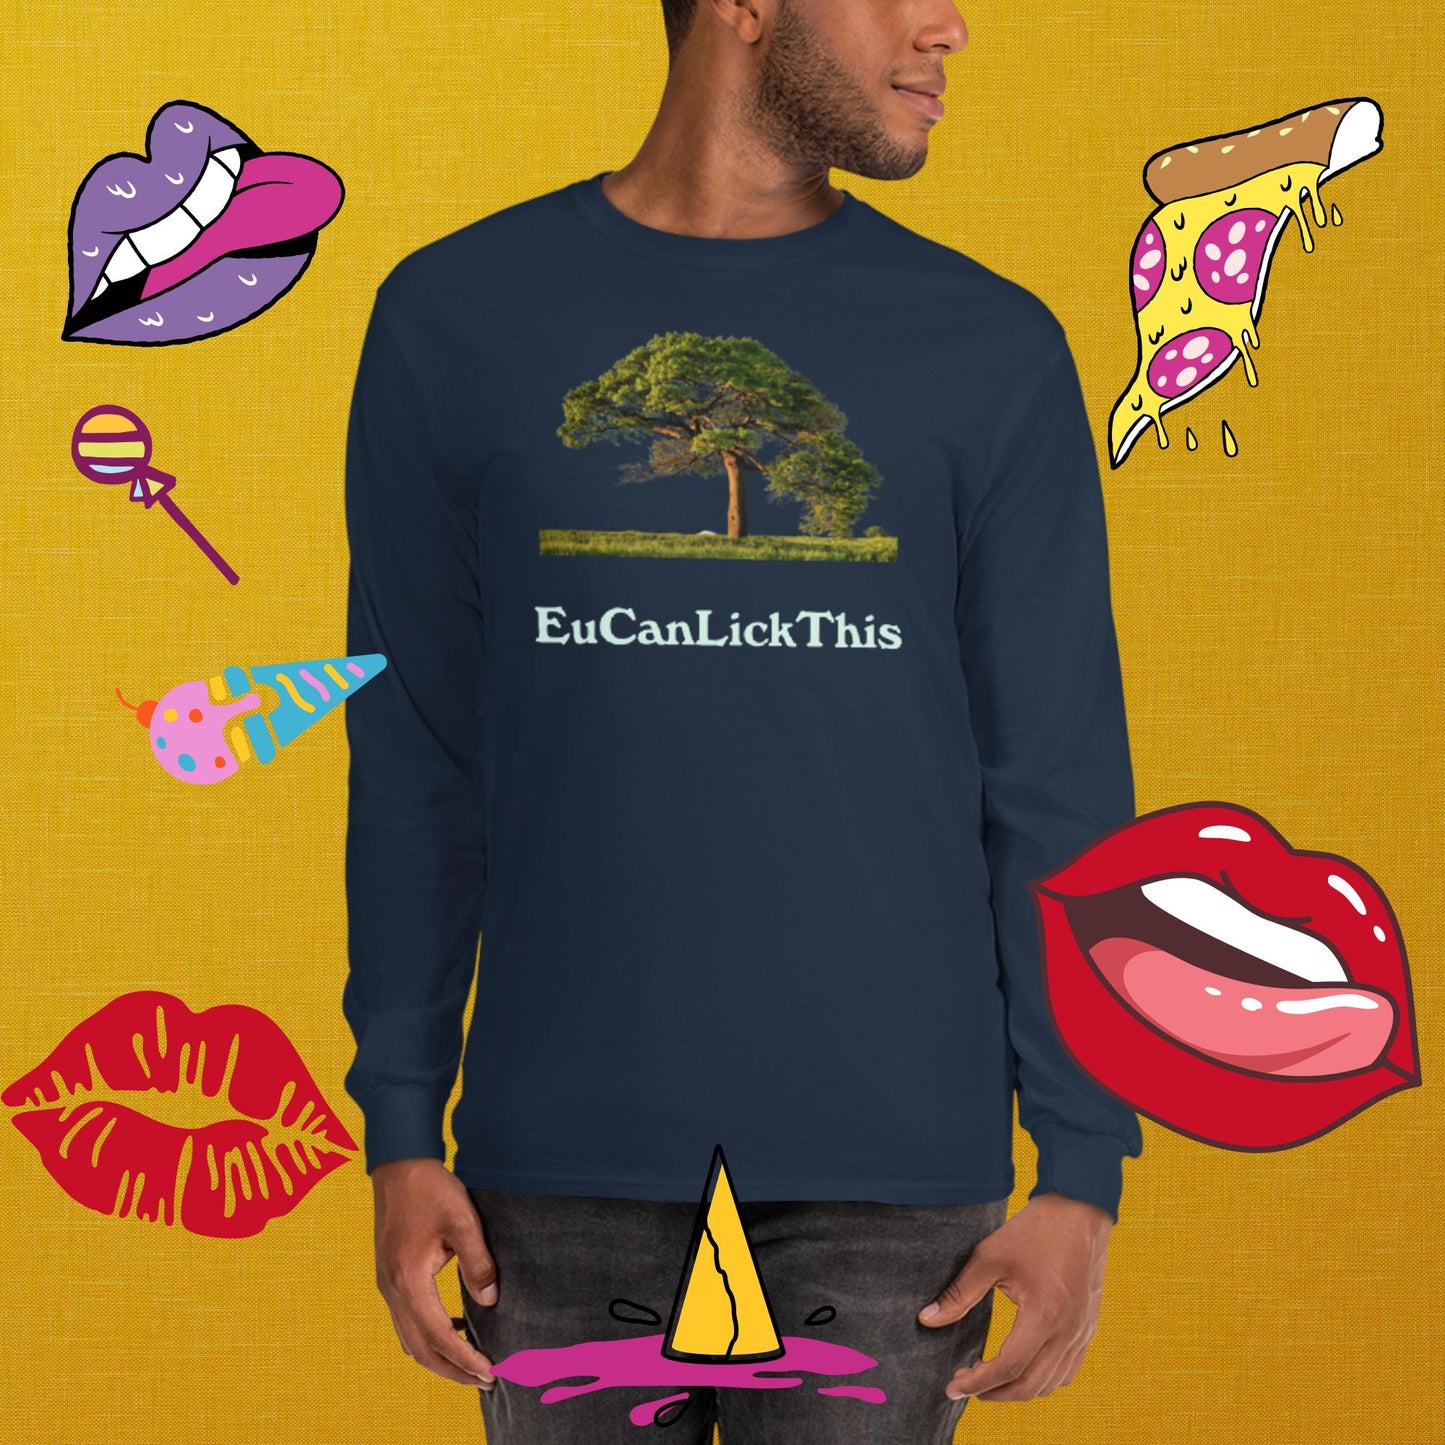 You CAN Lick This - Eucalytpus- Warm it UP!